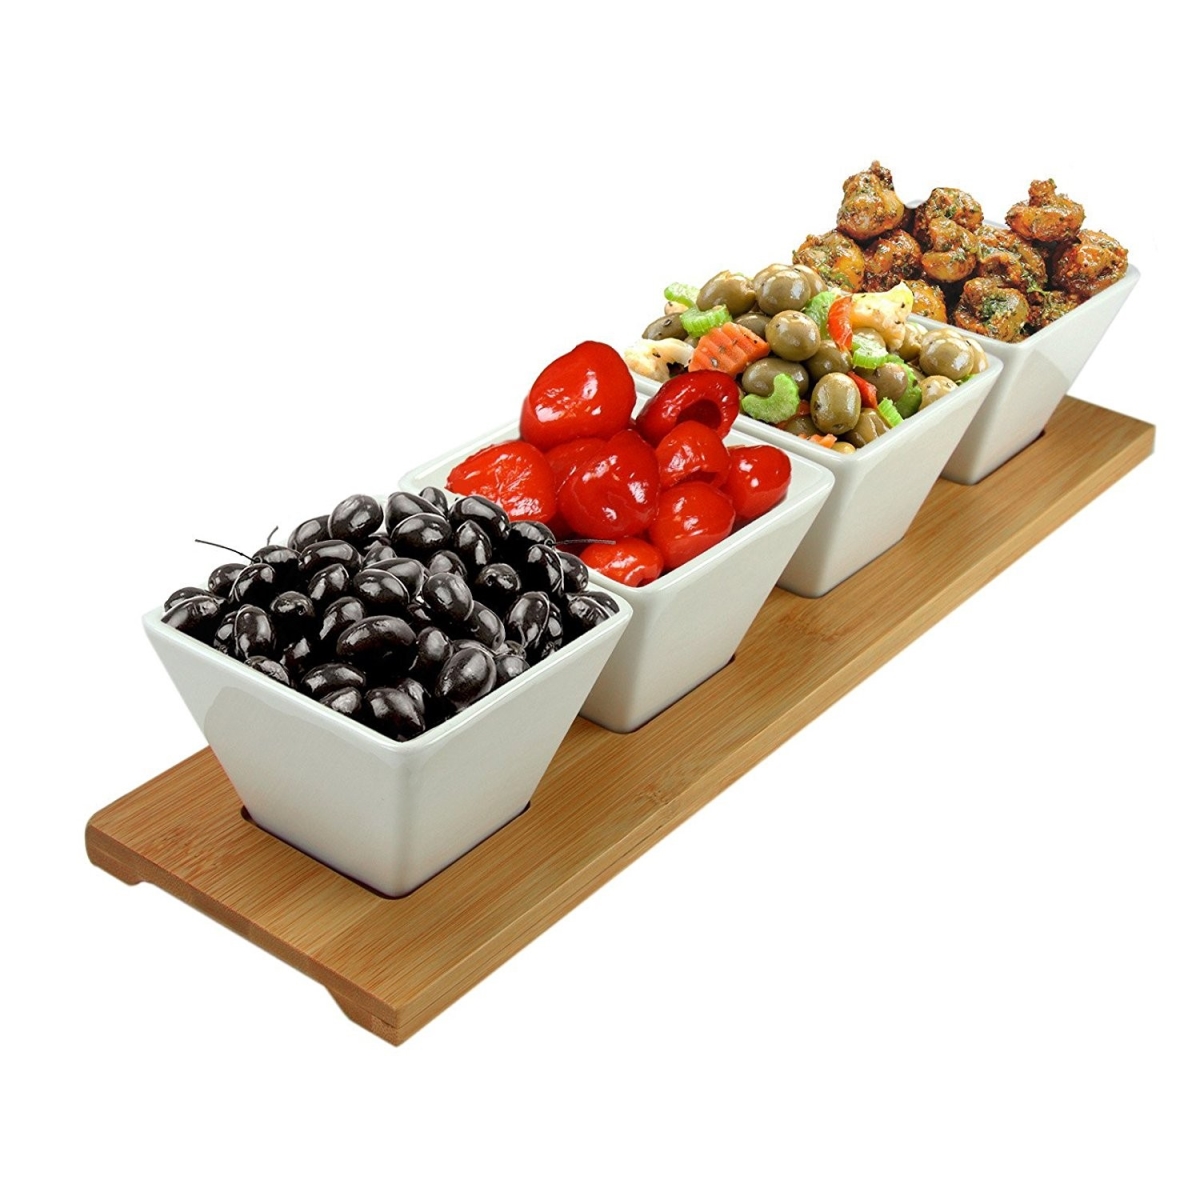 Picture of Elama Signature EL-232 Modern Appetizer & Condiment Server with 4 Serving Dishes & A Bamboo Serving Block - 5 Piece